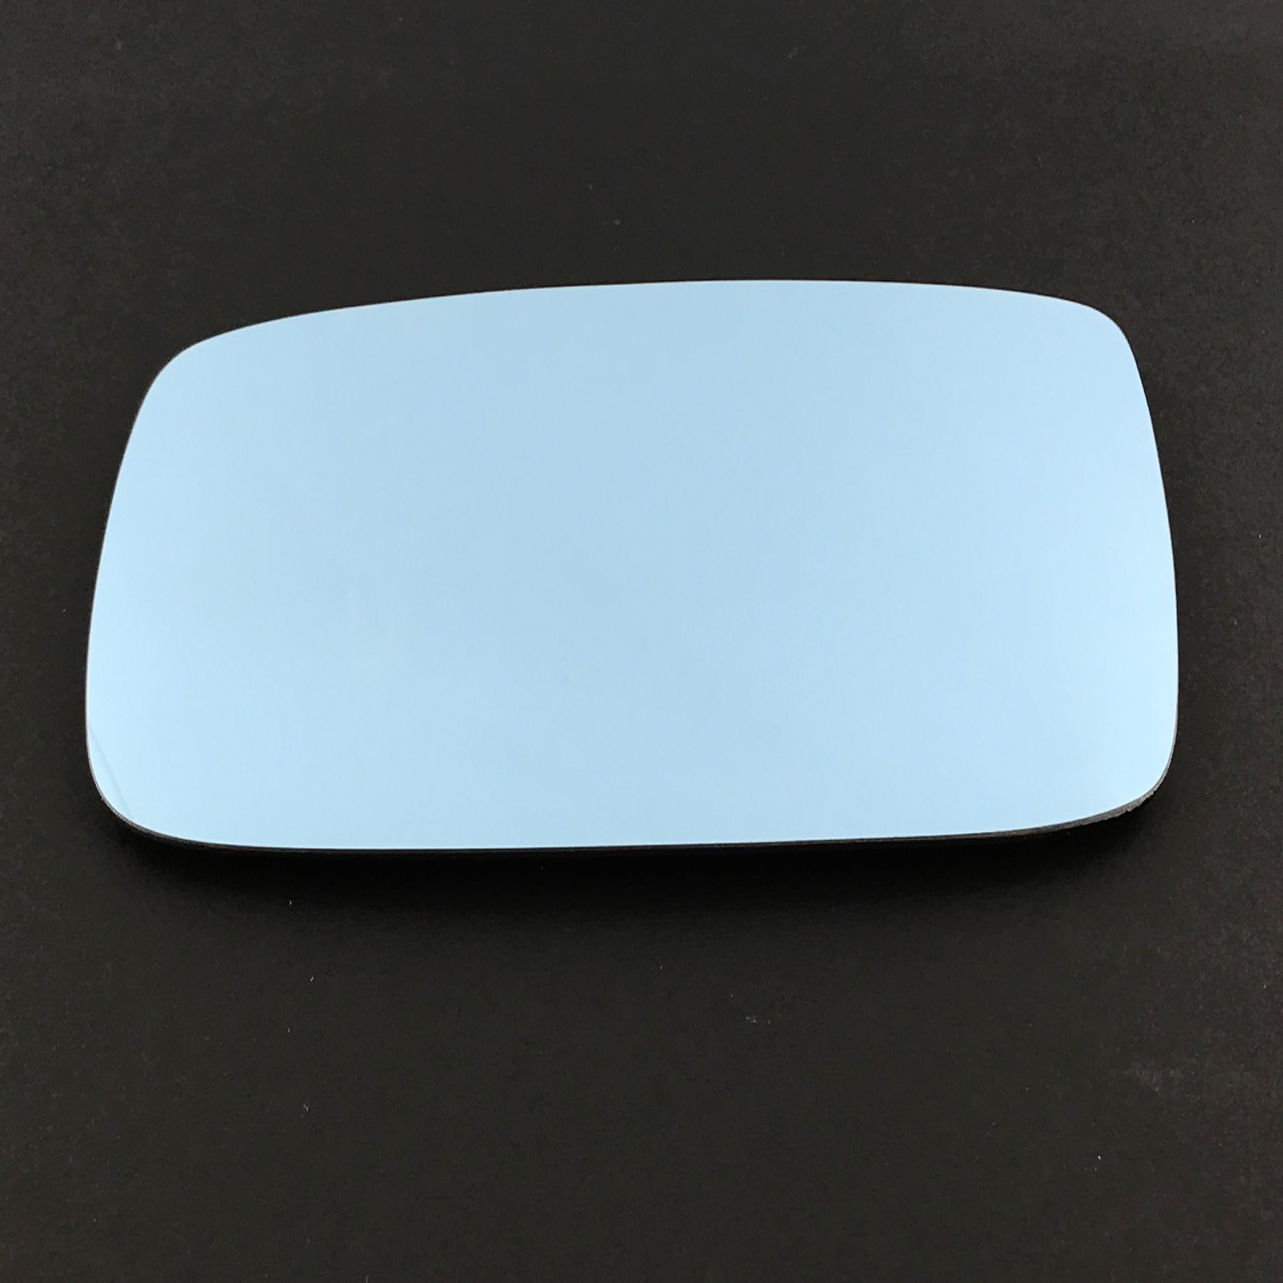 Volvo S80 Wing Mirror Glass RIGHT HAND ( UK Driver Side ) 1997 to 1998 – Convex Wing Mirror ( Blue Tinted )